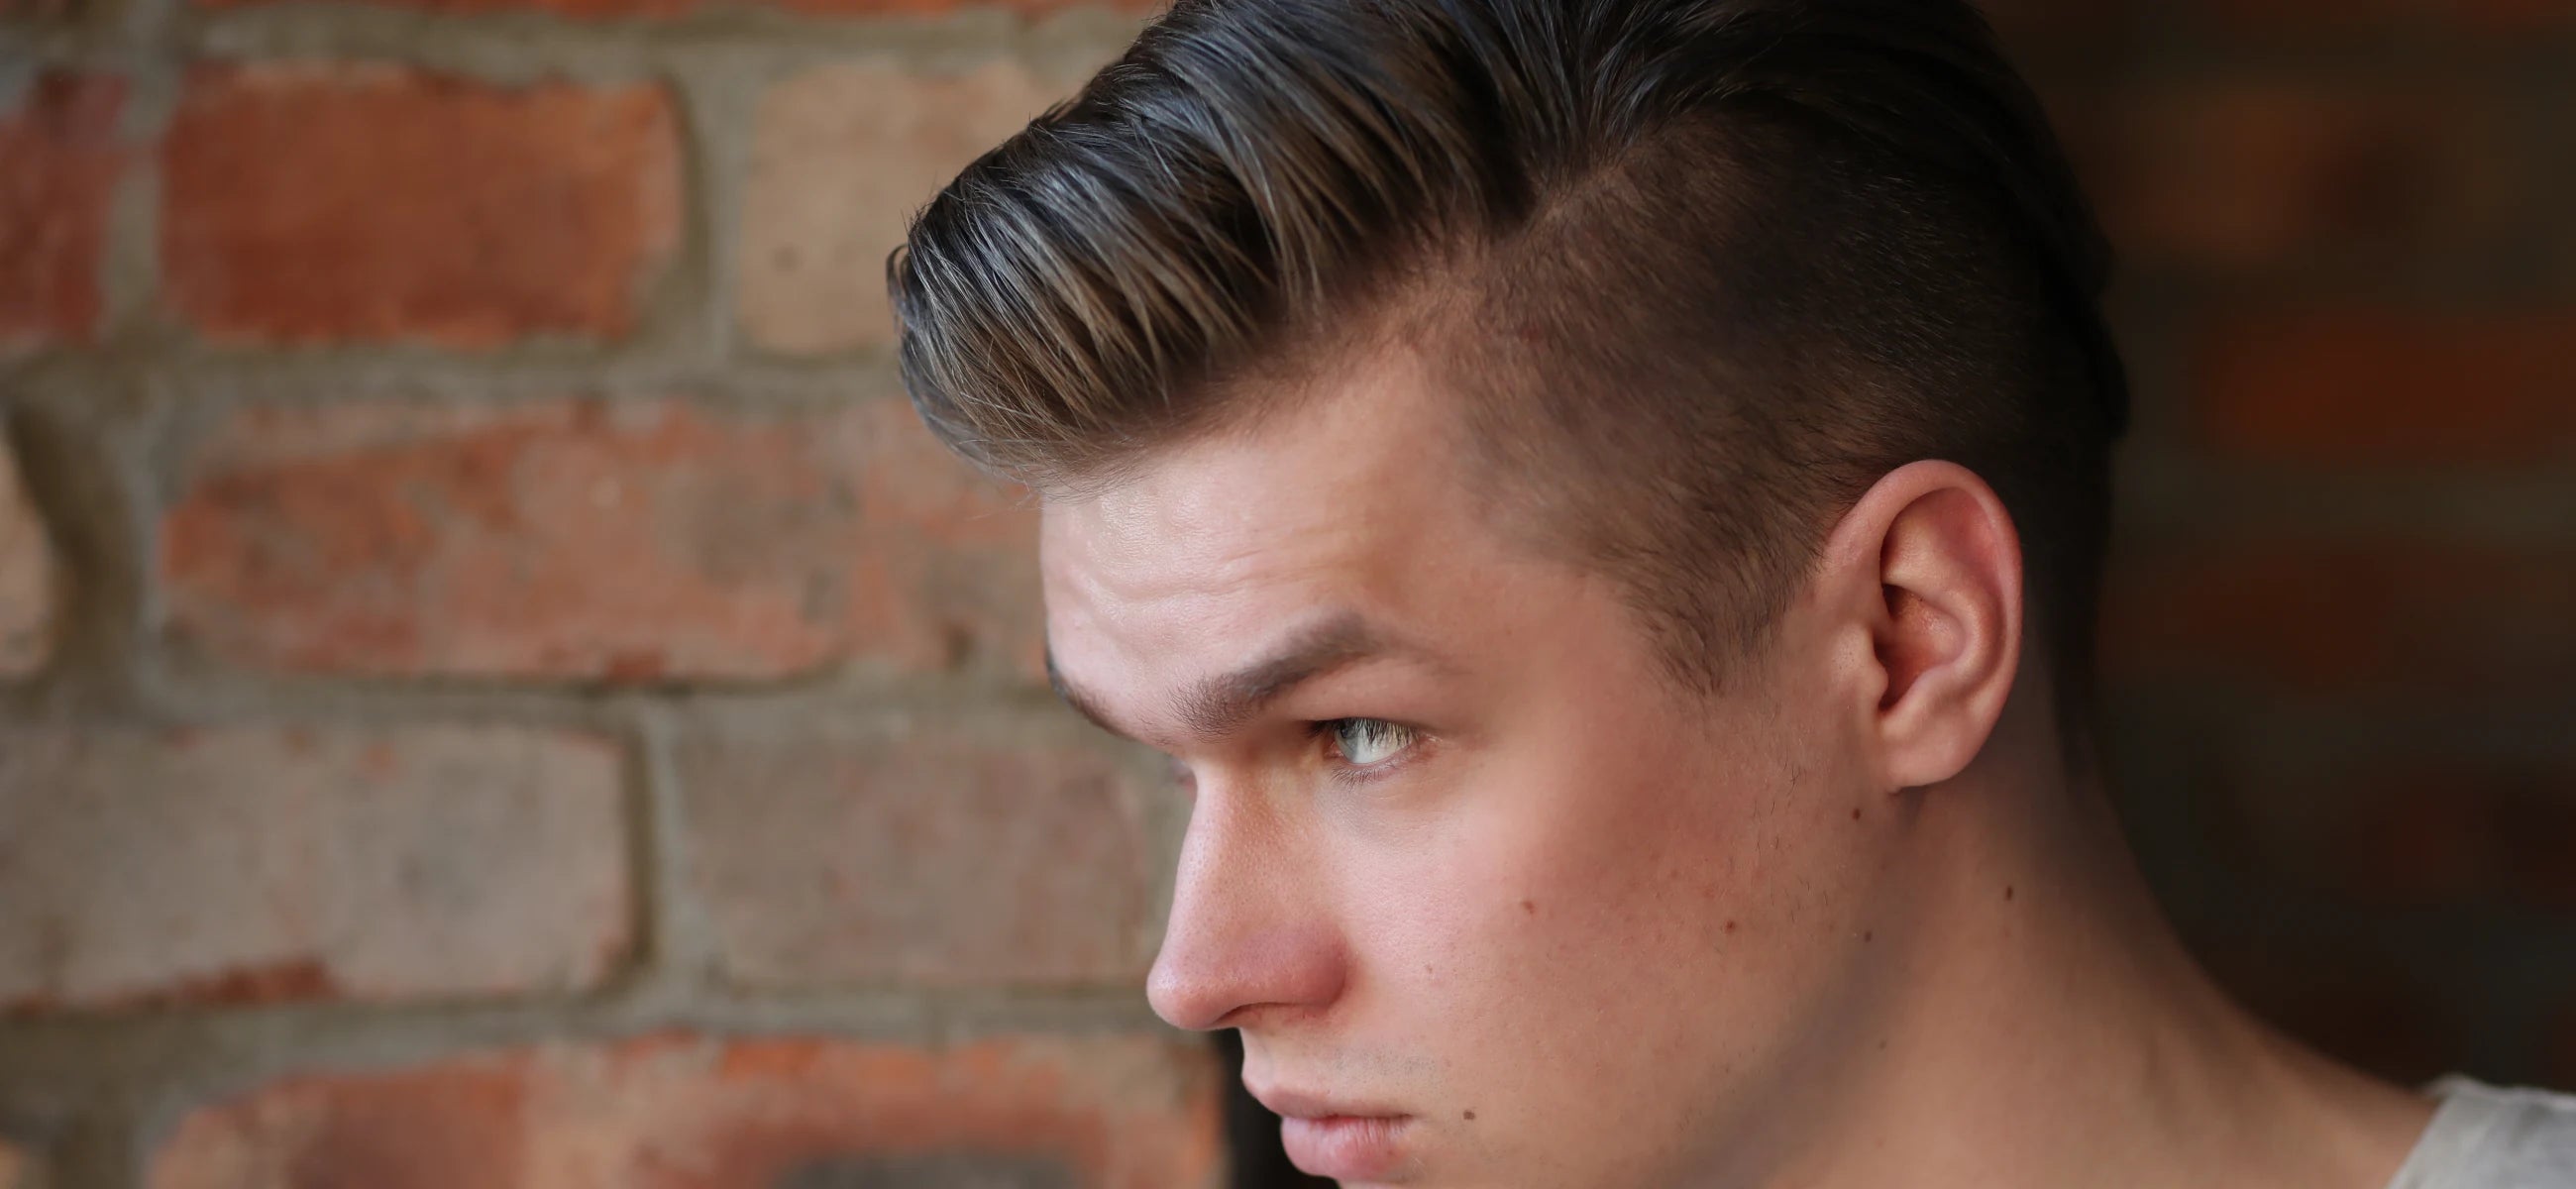 Midfade haircuts – what are the best midfade haircut ideas?